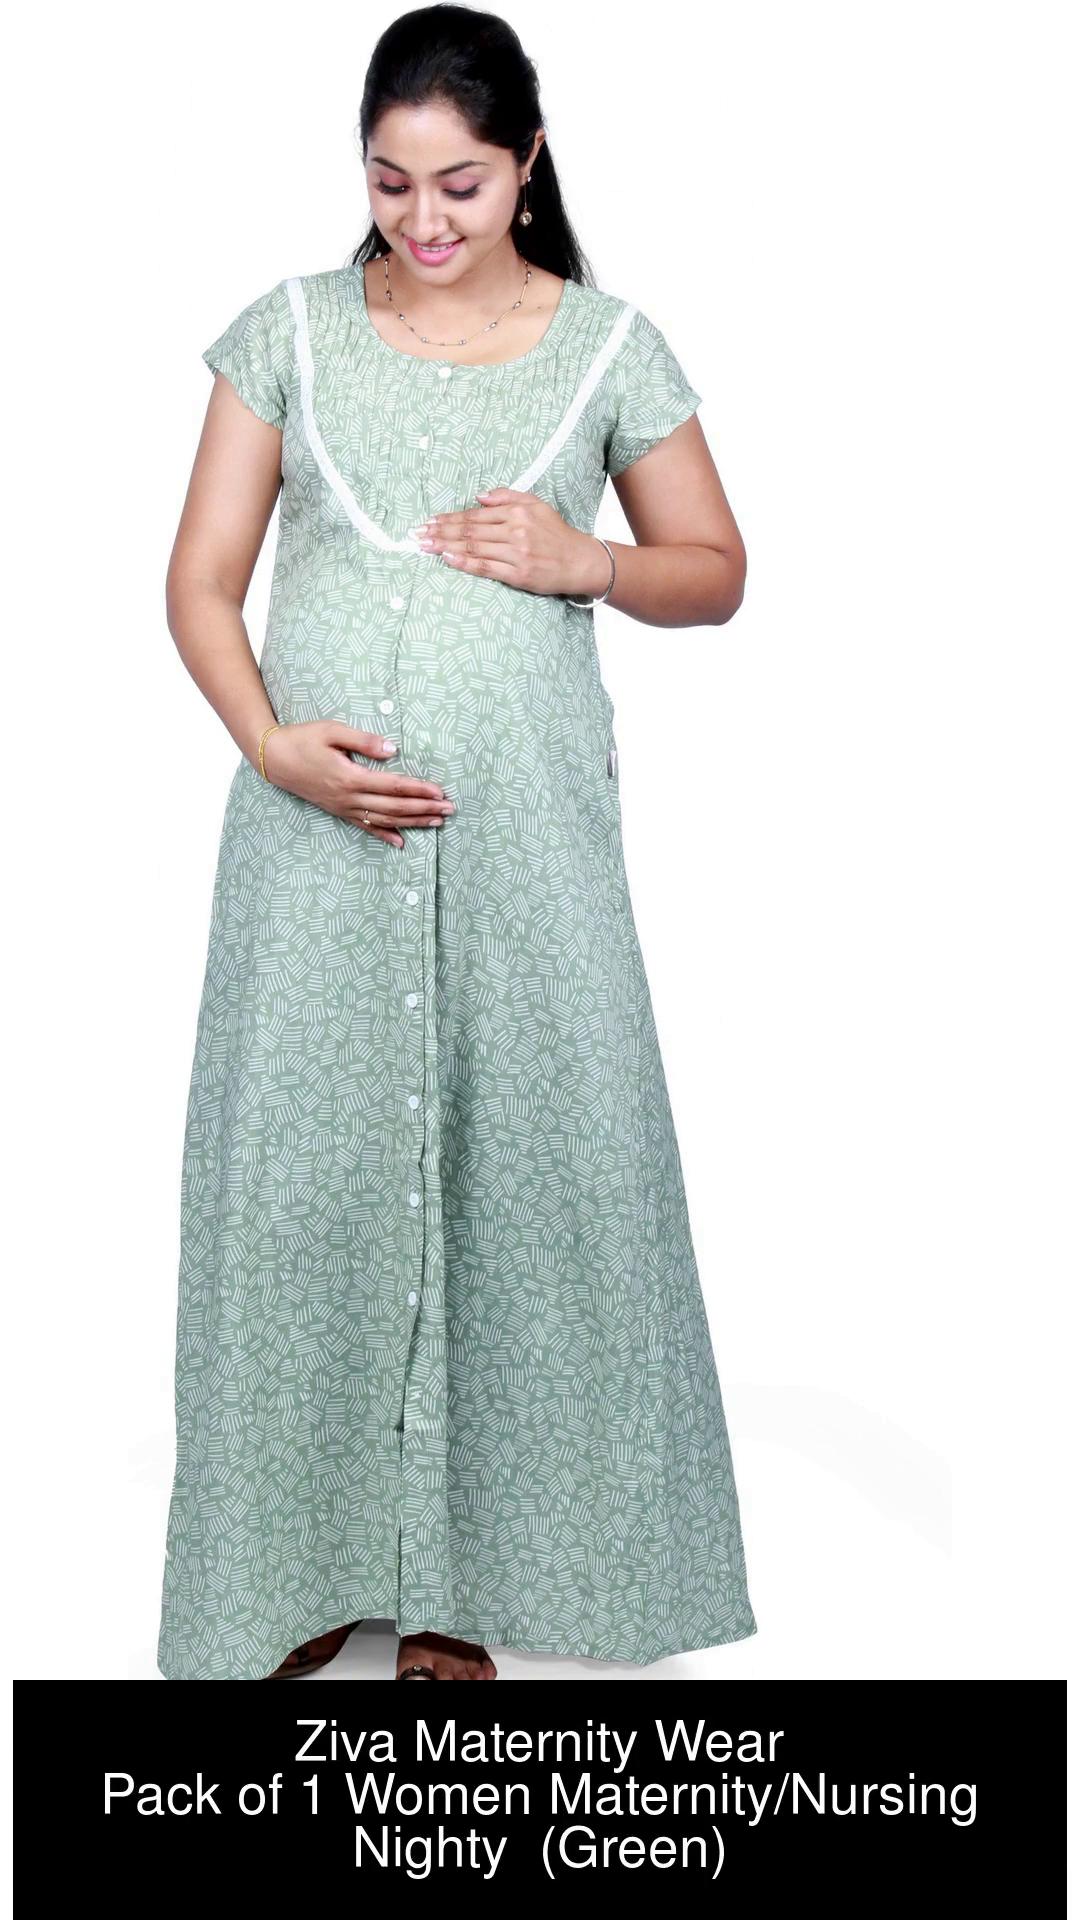 Ziva Maternity Wear, Pondicherry - THE BEST MATERNITY NURSING TOP FOR EVERY  MOMS. ZIVA MATERNITY WEAR For Pregnant ladies & Feeding Mothers. Contact us  on PUDUCHERRY NO18, MISSION STREET - 605001, PH 